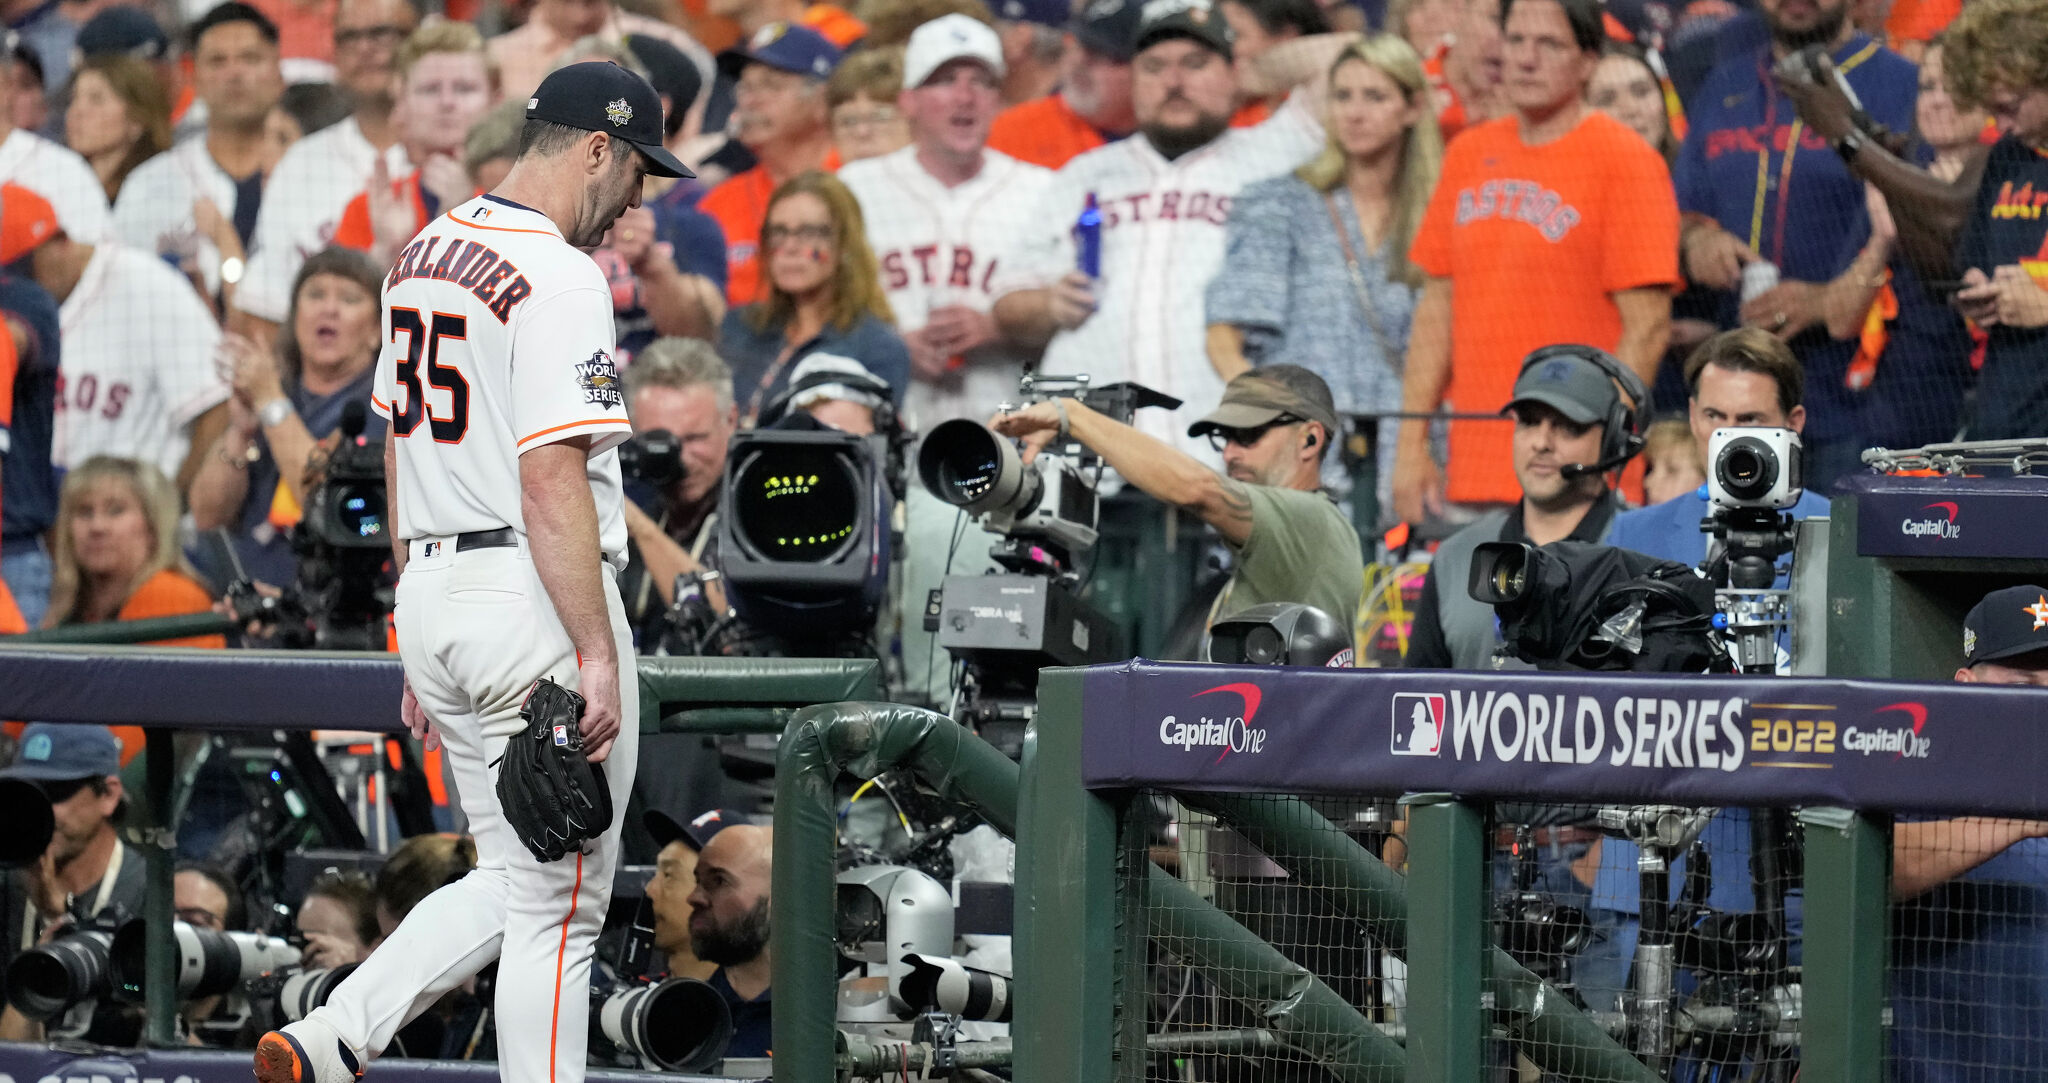 Houston Astros: Justin Verlander pitches well, but takes Game 1 loss